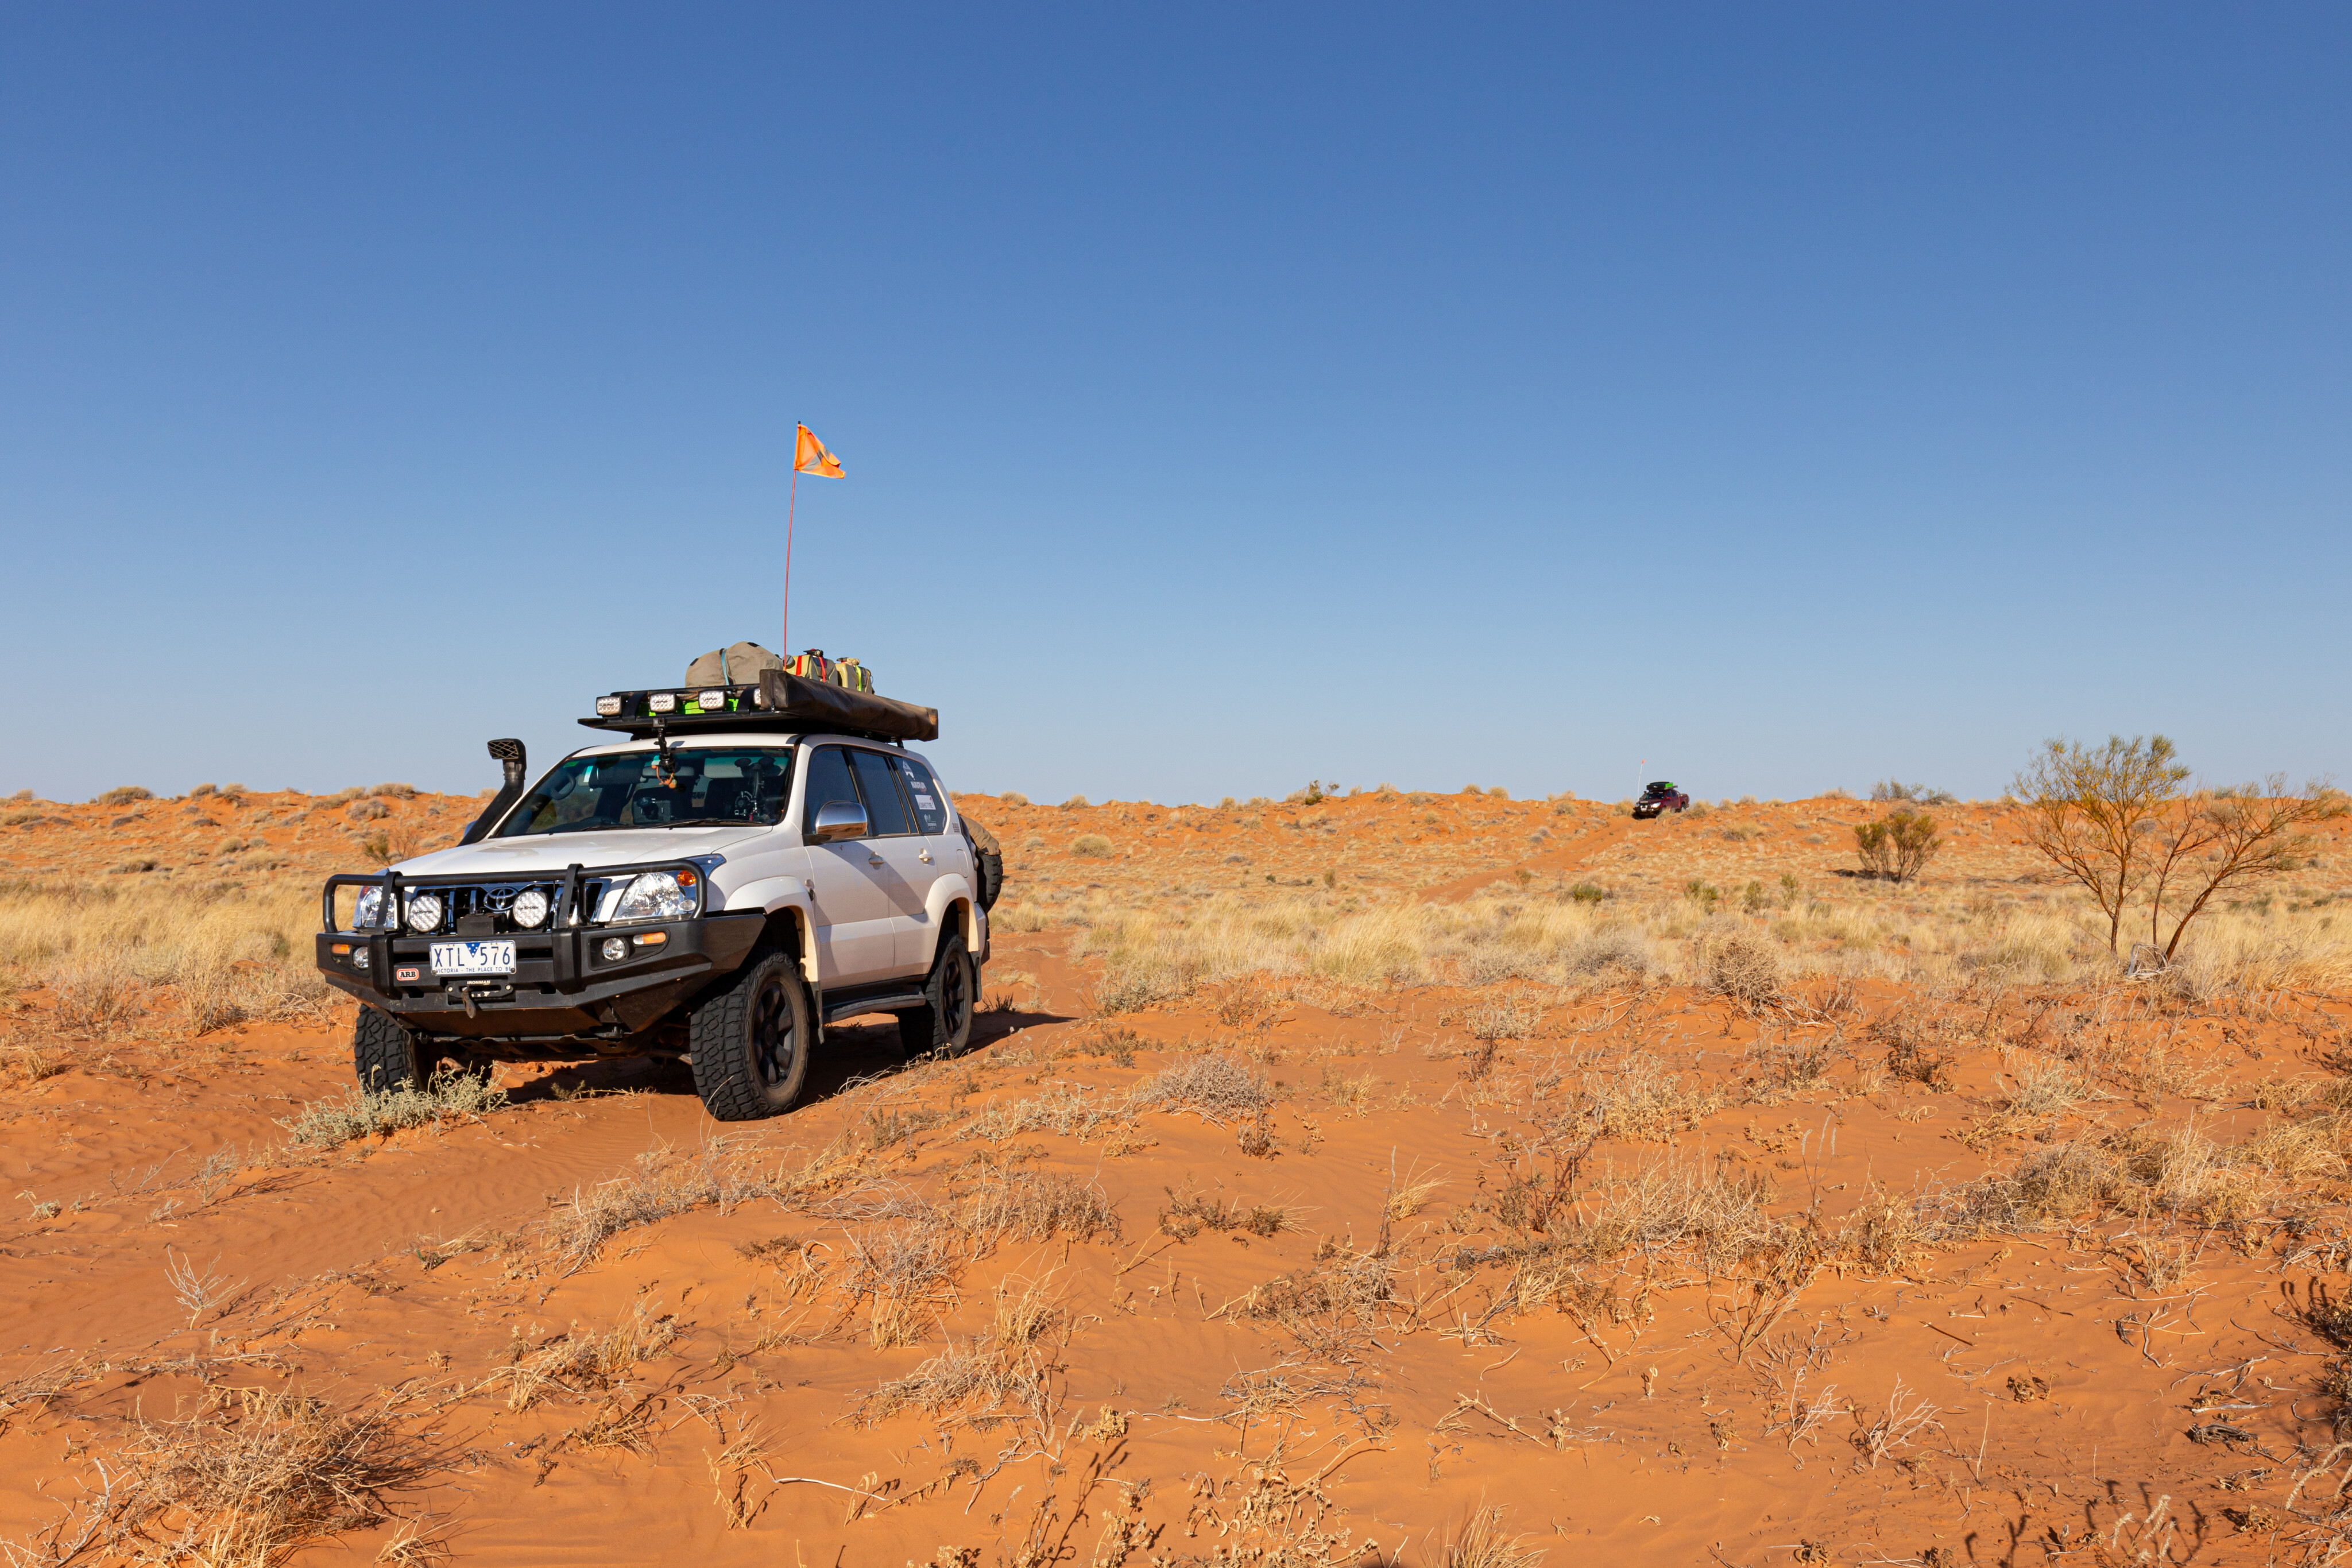 d38729a5/4x4 australia explore trip planning keep your fuel and lightweight gear on the roof rack jpg